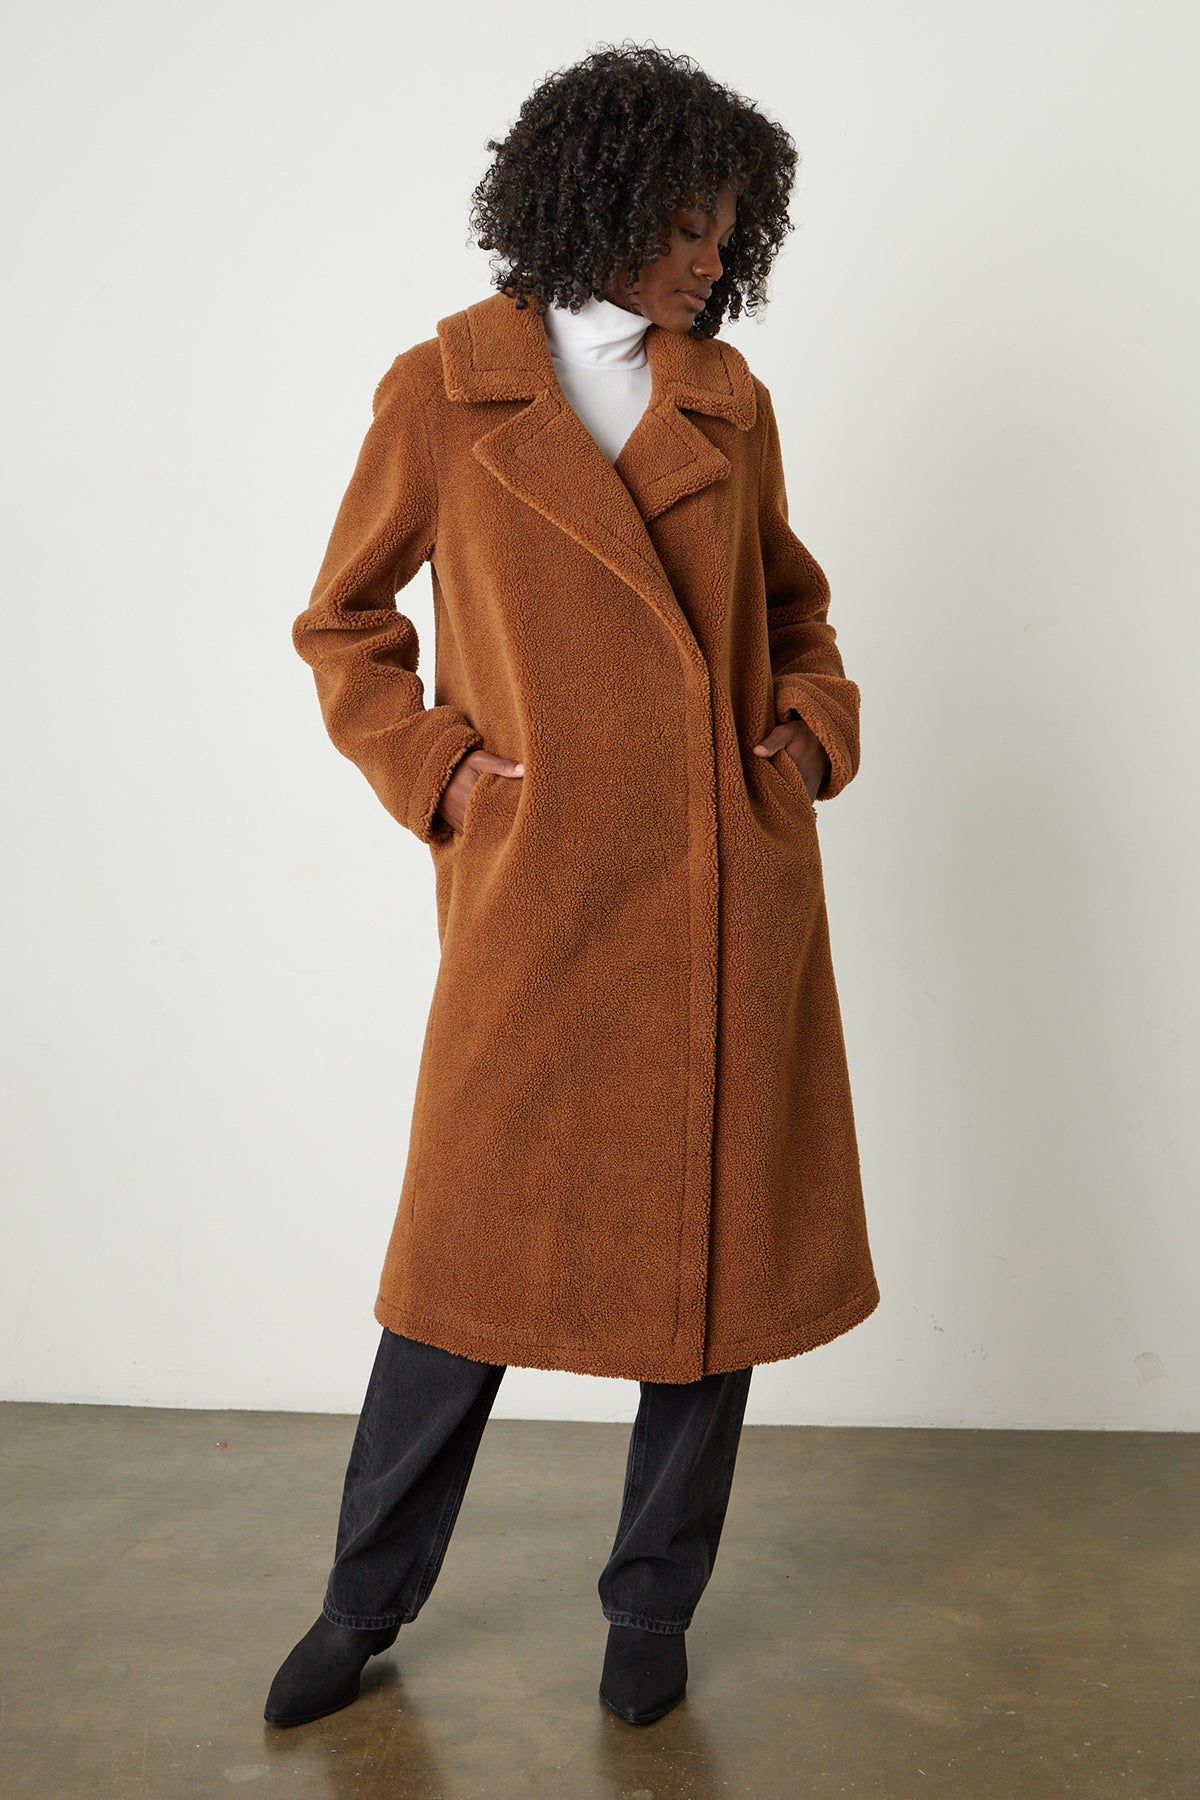   A woman wearing a REINA FAUX SHEARLING COAT by Velvet by Graham & Spencer with double-breasted silhouette and popper button closures. 